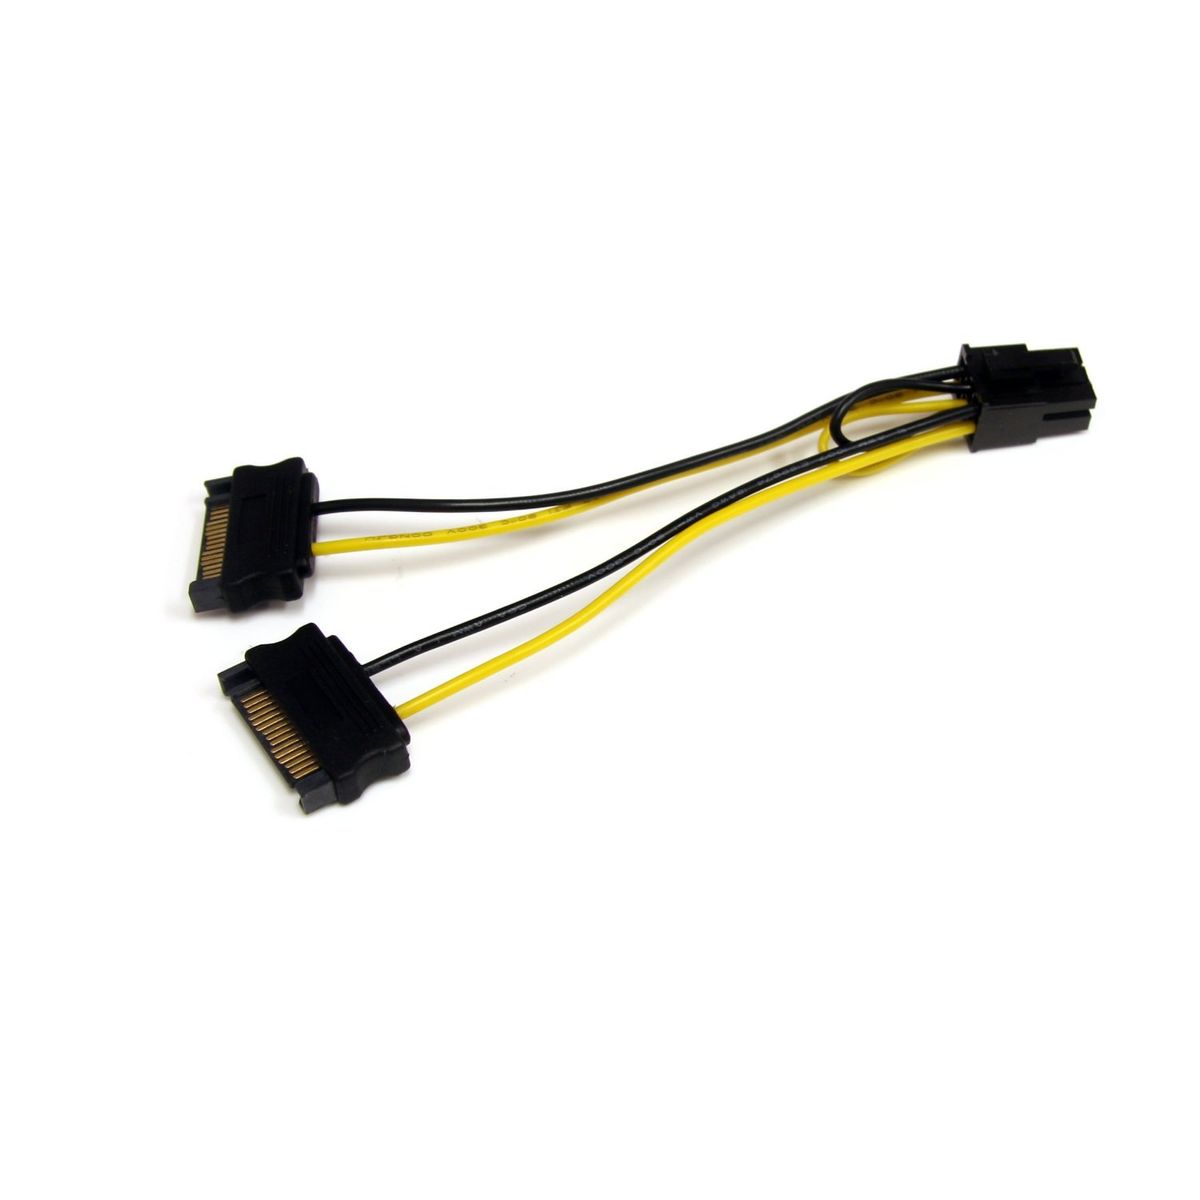 Cable D'alim. 2x Sata Vers Pcie 6 Broches - 15 Cm - Cable D'alimentation Pour Carte Video - 2x Sata Vers Pcie 6 Broches